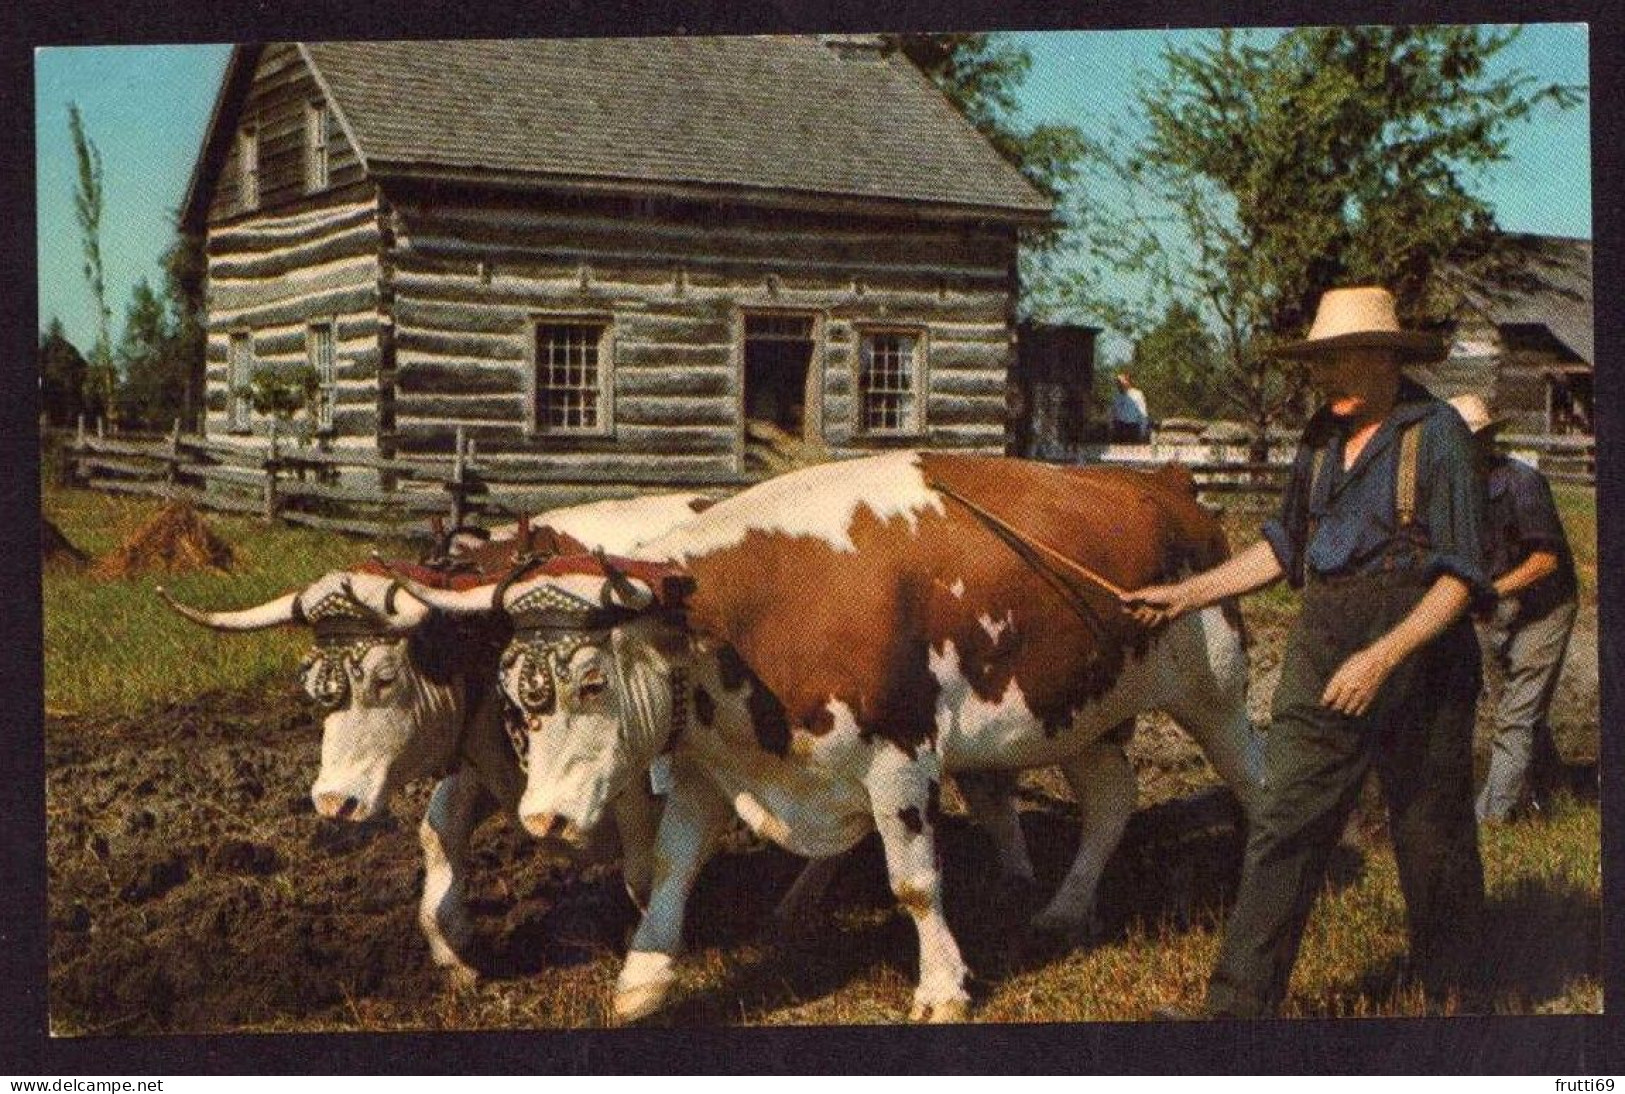 AK 212268 COW / KUH - Canada - Upper Canada Viilage - Cows